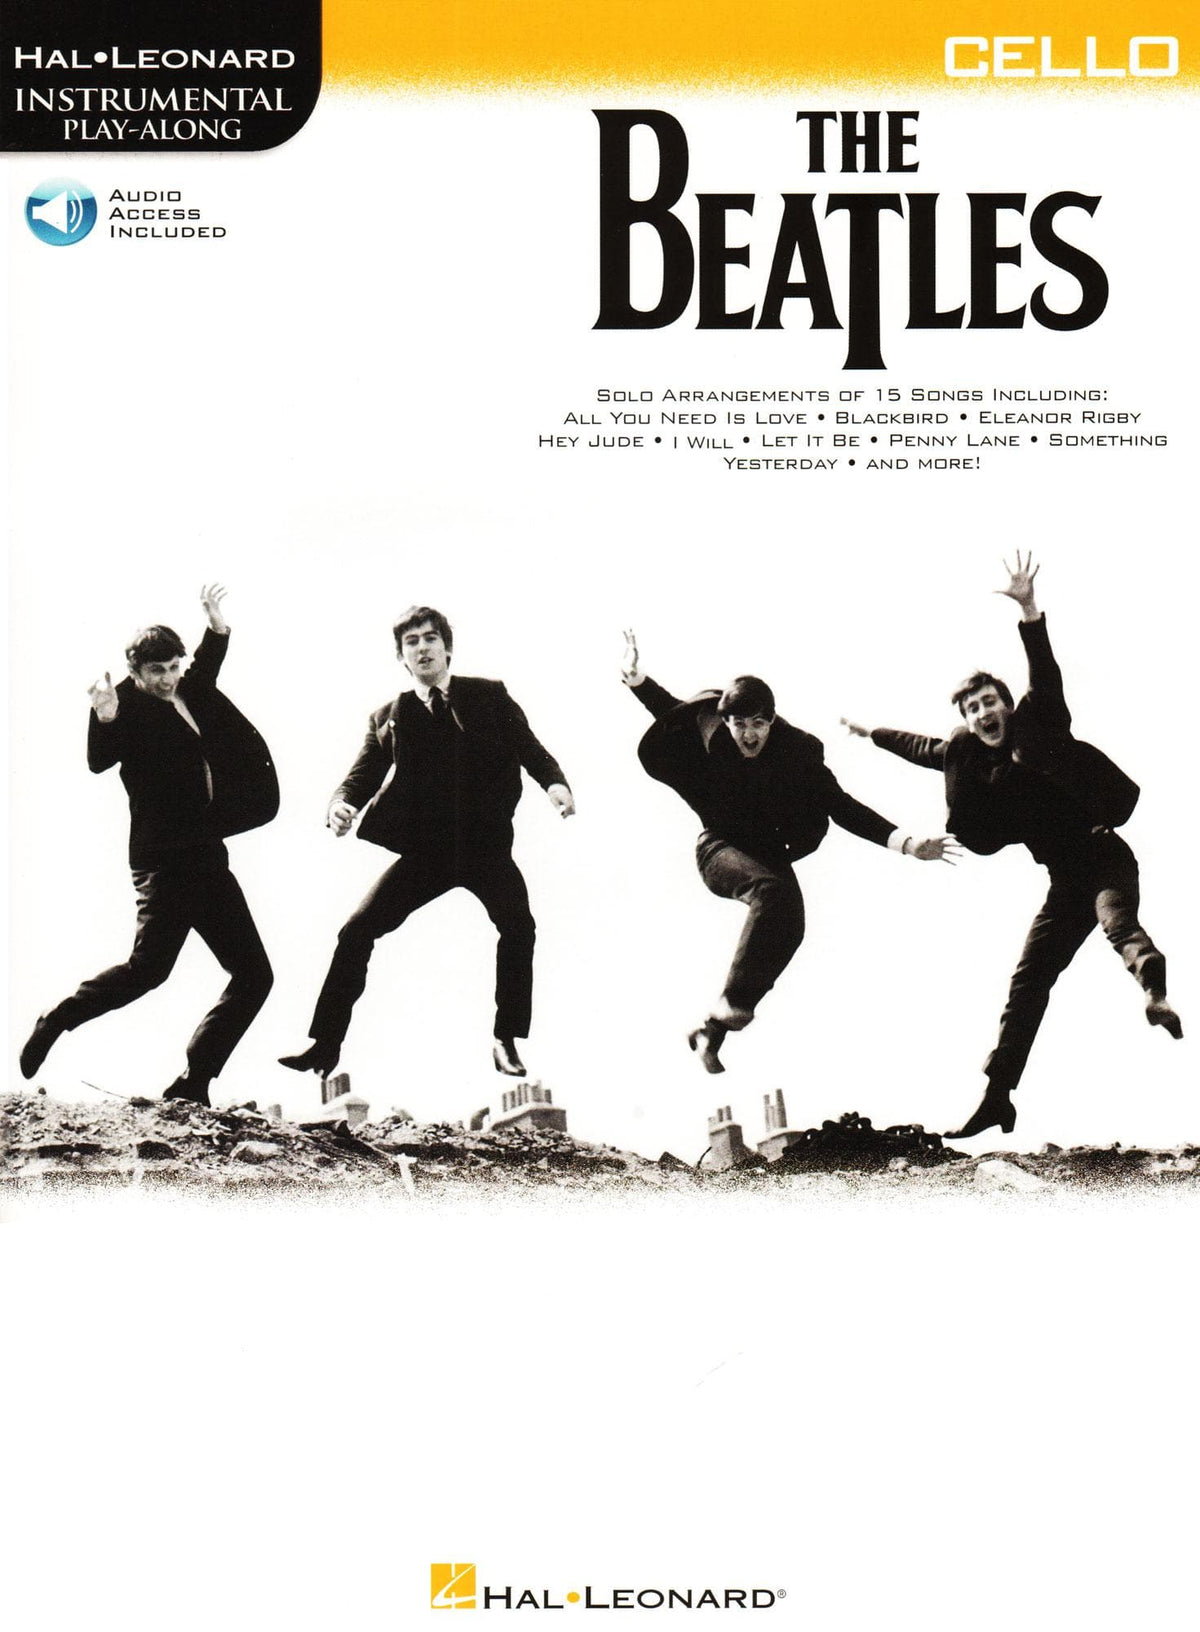 The Beatles - Instrumental Play-Along - 15 Songs - for Cello with Online Audio - Hal Leonard